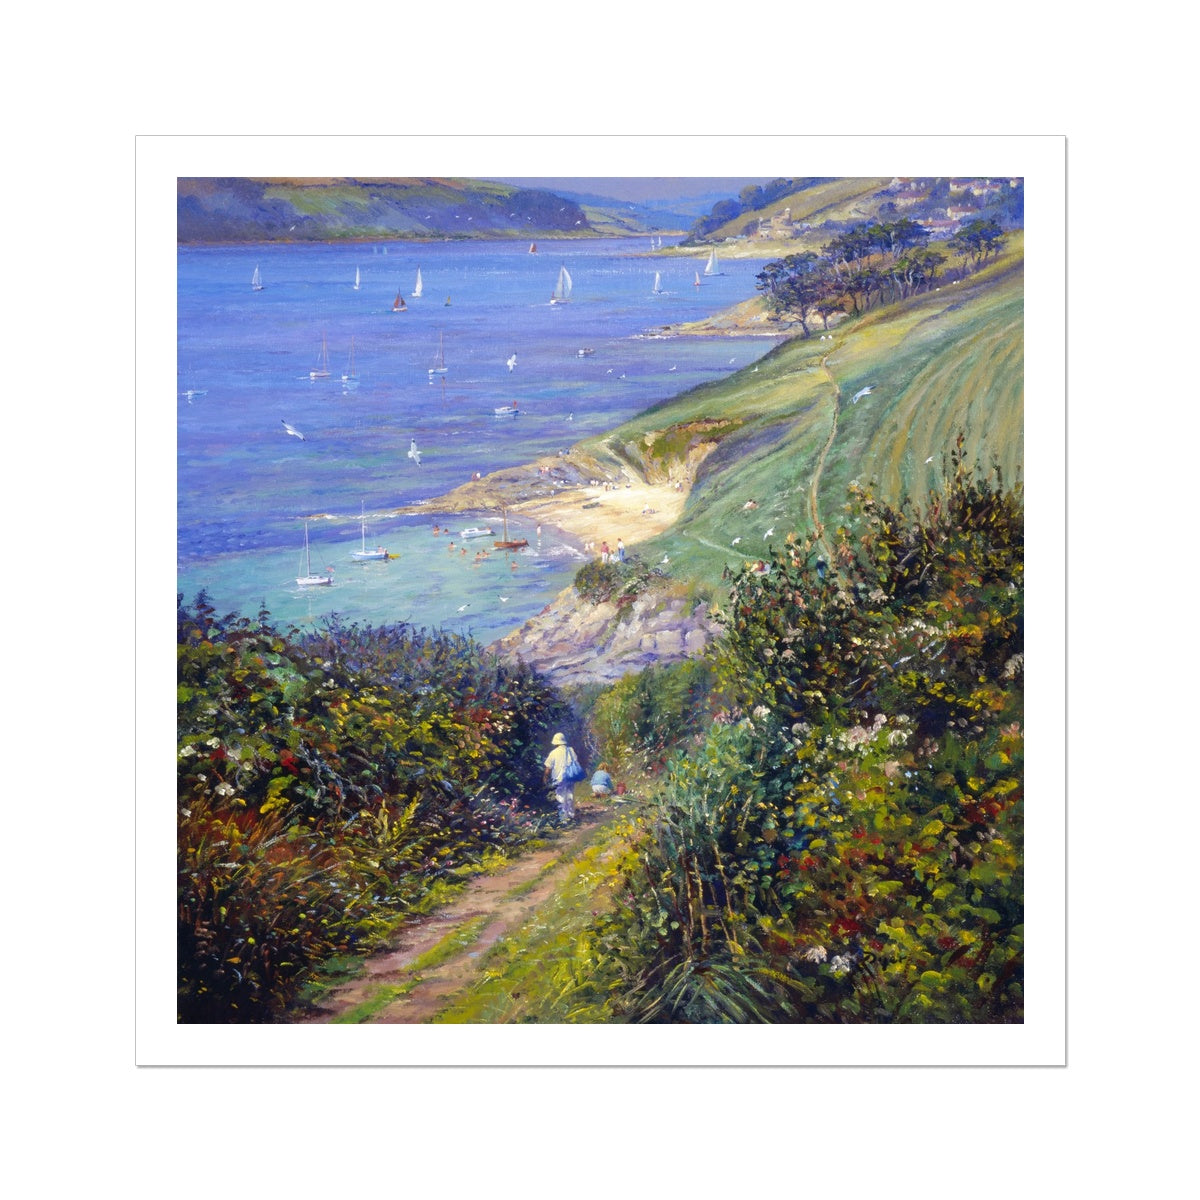 Ted Dyer Fine Art Print. Open Edition Cornish Art Print. 'Blackberry Path to the Beach, St Anthony in Roseland'. Cornwall Art Gallery